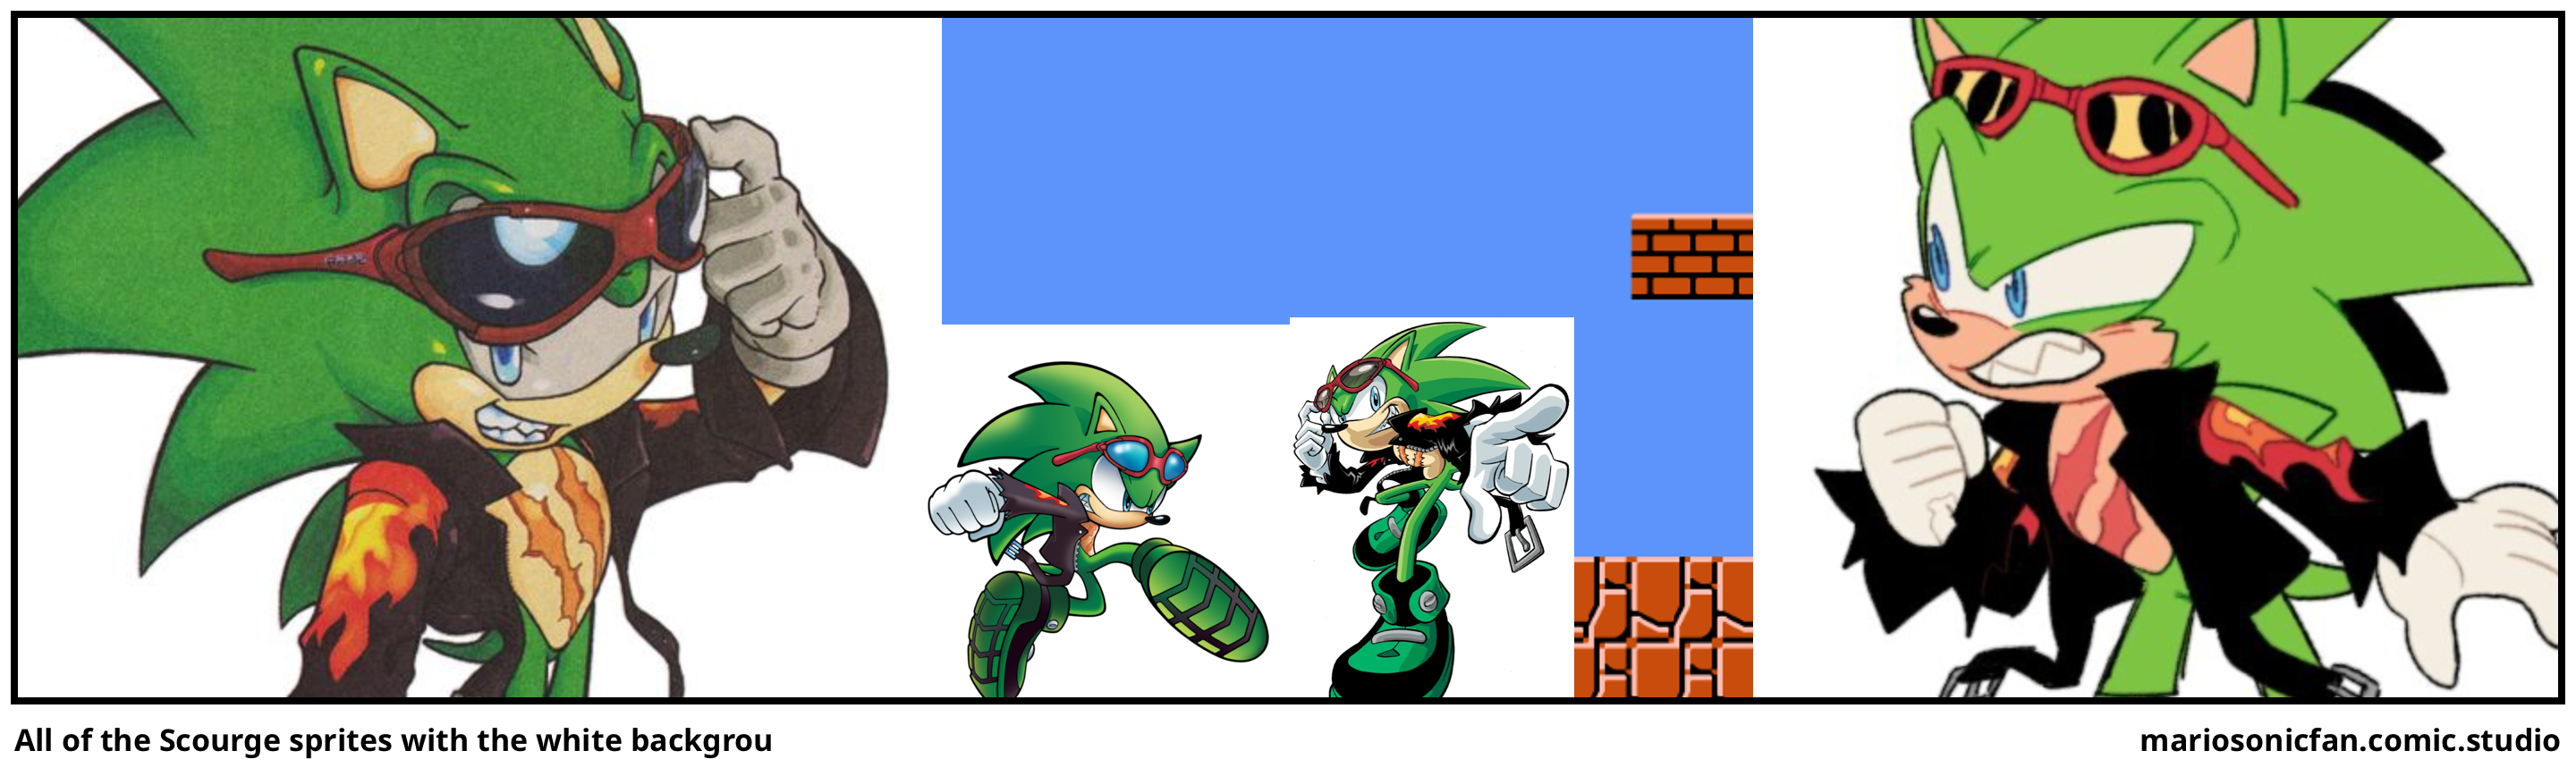 All of the Scourge sprites with the white backgrou